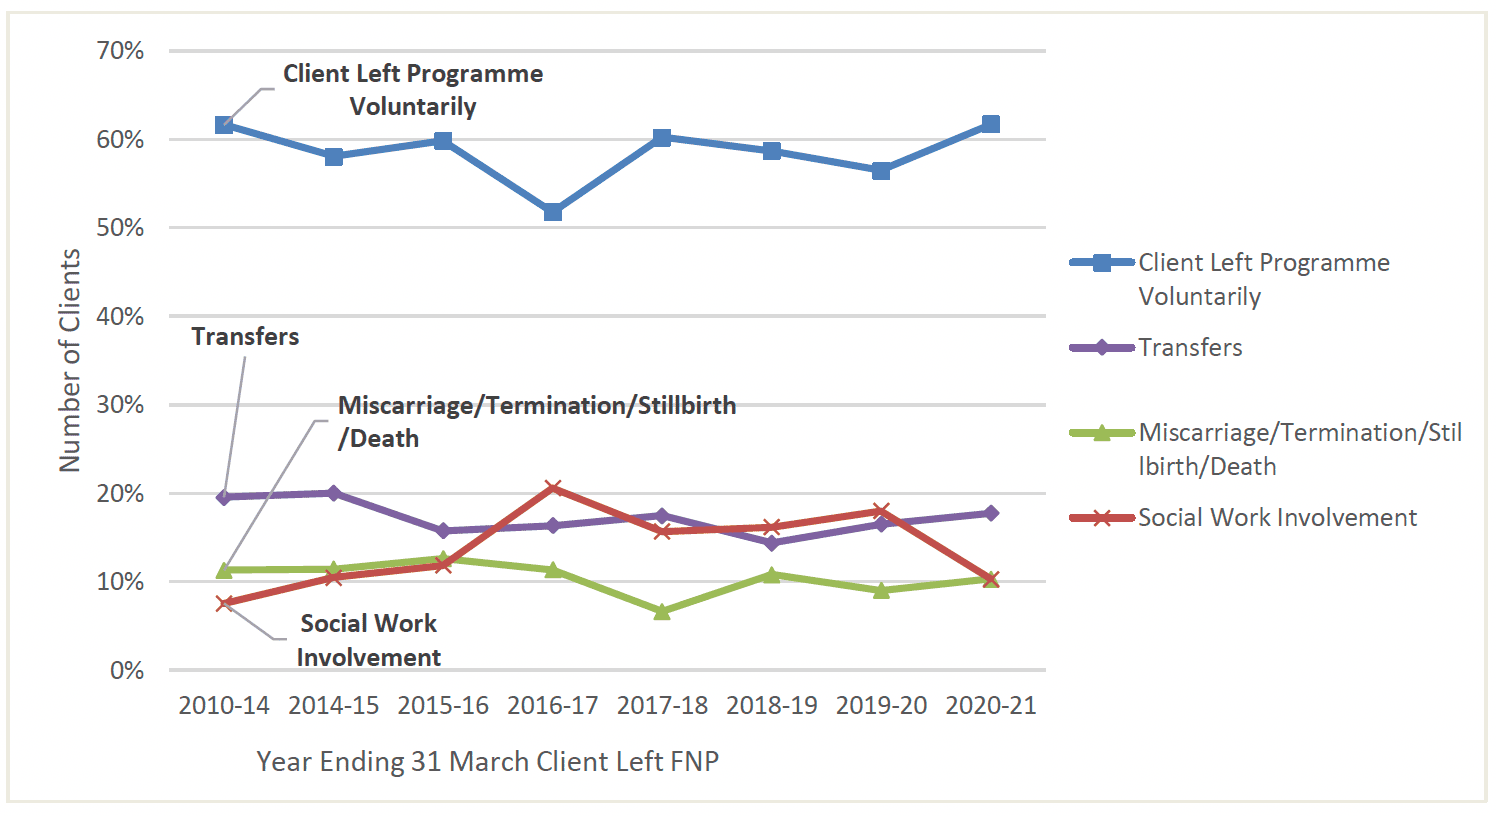 Chart 15 shows the proportion of FNP clients leaving FNP before completion, by each leaving reason group. The client leaving voluntarily has typically accounted for the majority of clients leaving early.